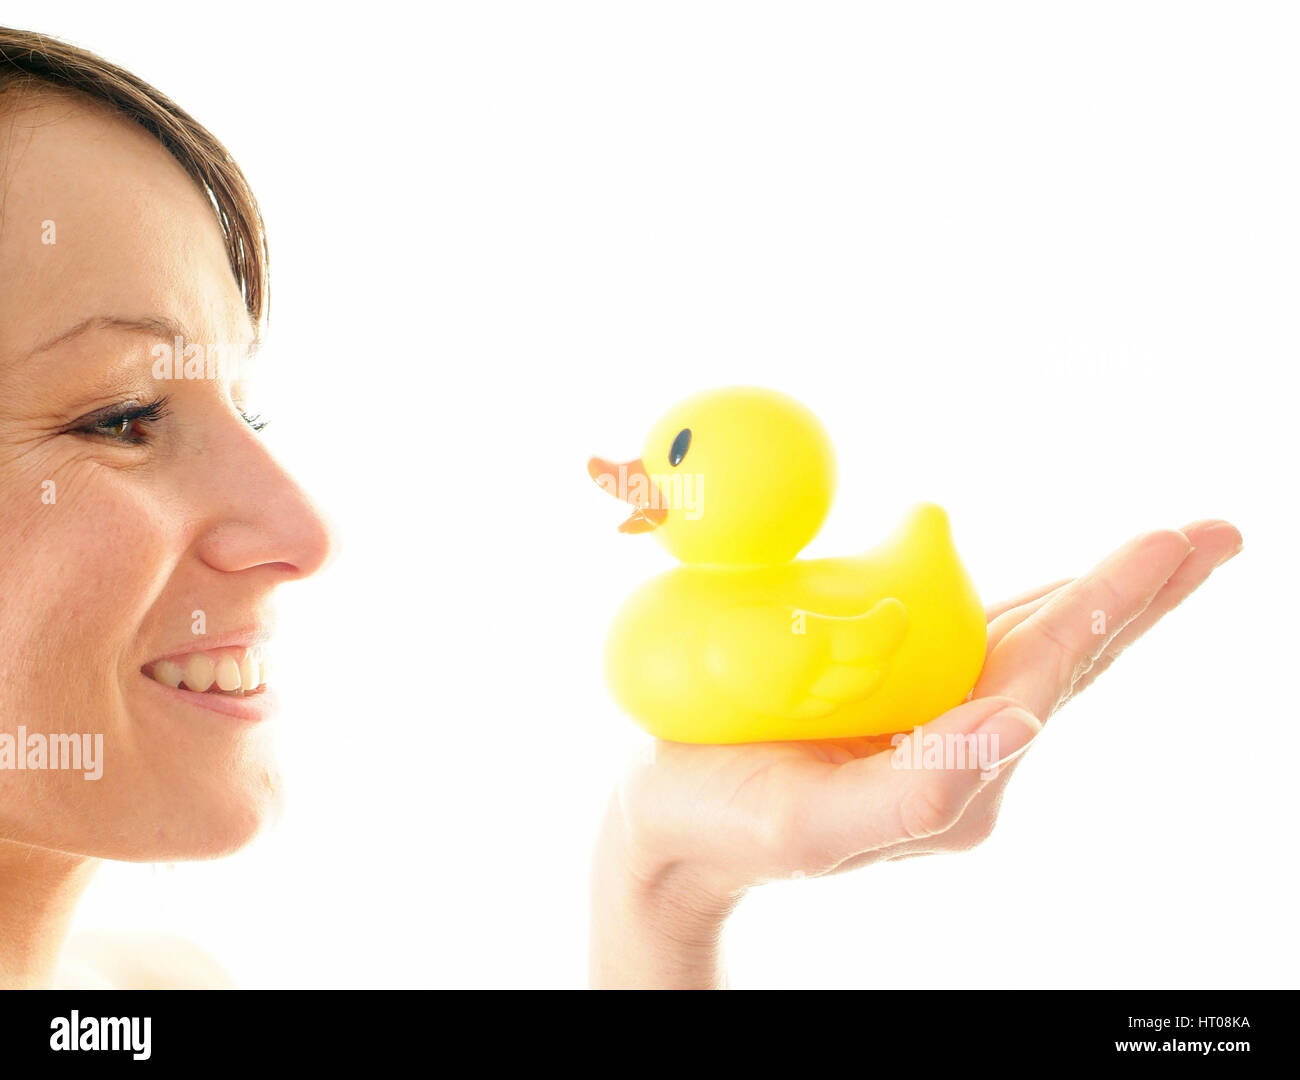 Junge Frau mit Badeente - young woman with rubber duck Stock Photo